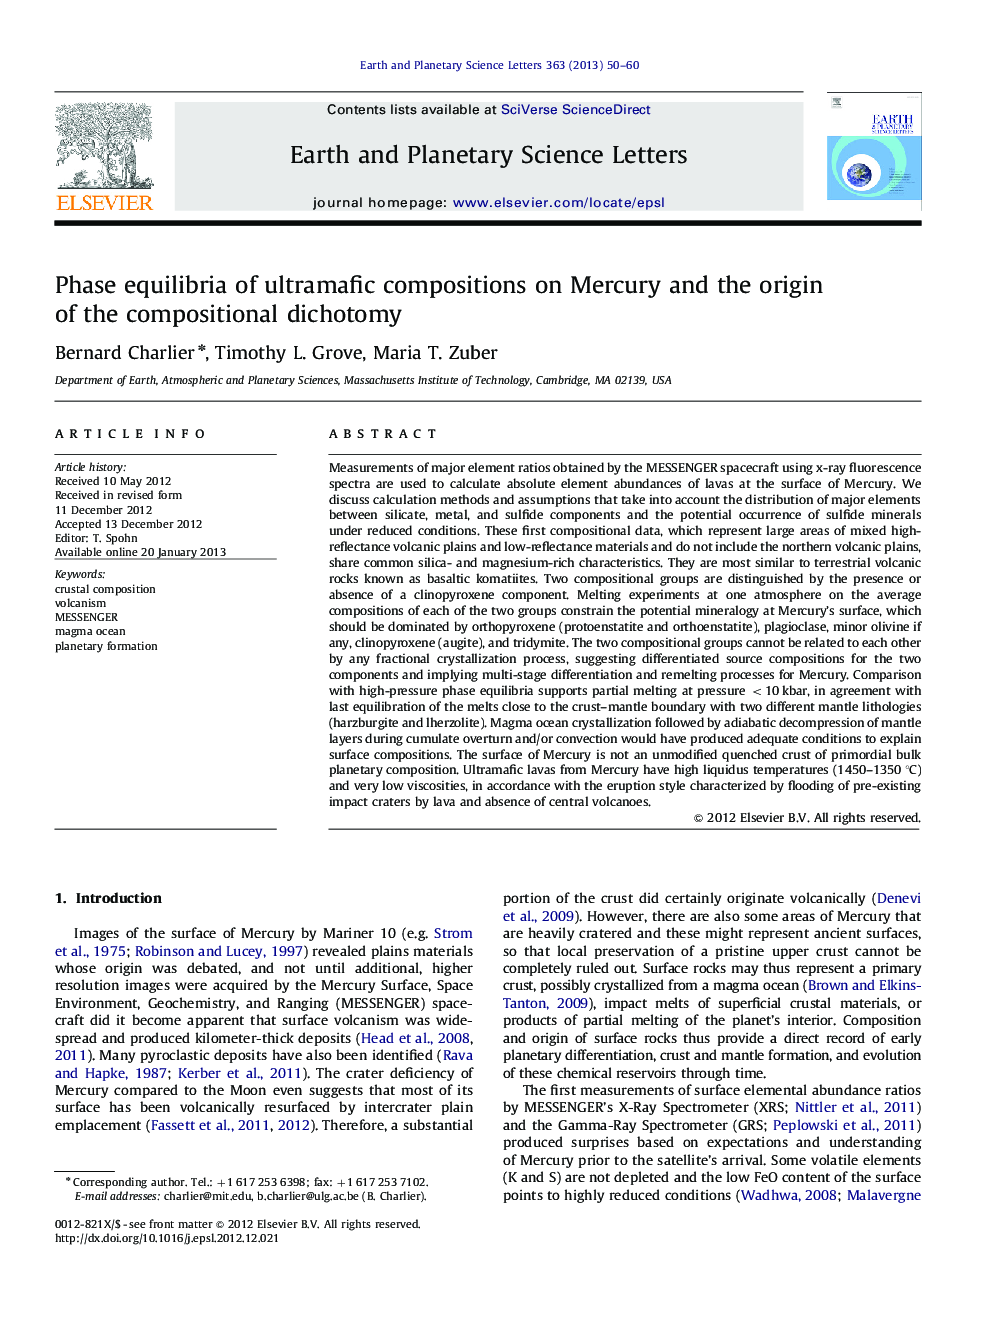 Phase equilibria of ultramafic compositions on Mercury and the origin of the compositional dichotomy